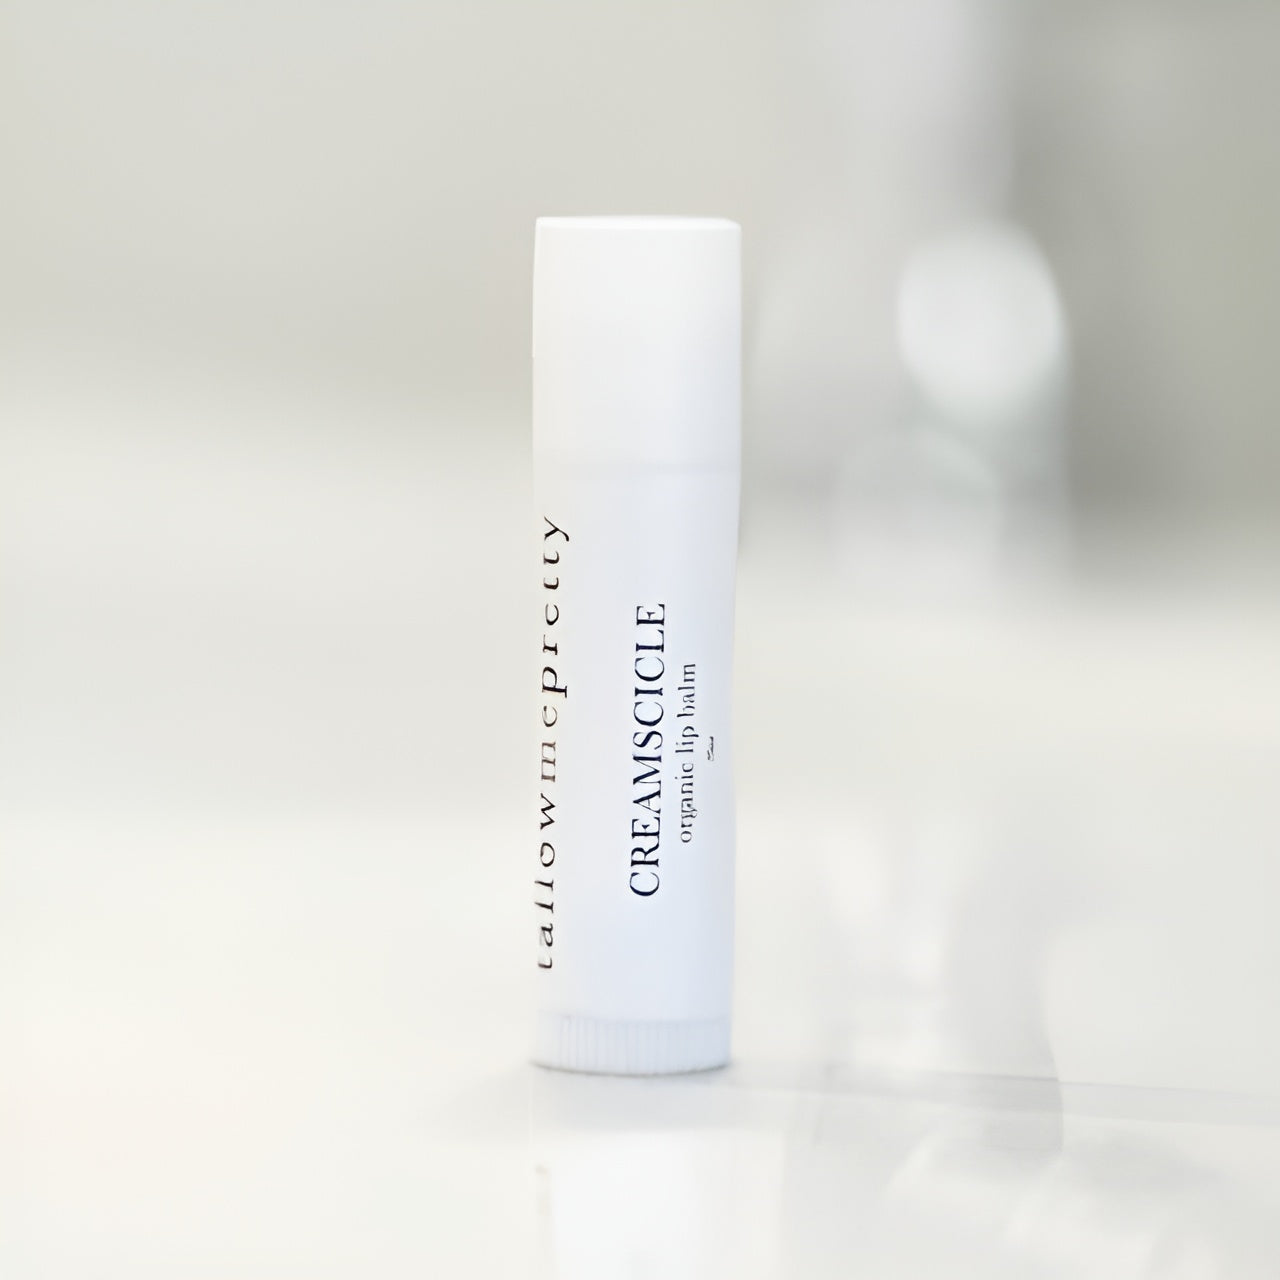 Product shot of Tallow Me Pretty's Creamsicle Organic Lip Balm, poised on a clean, soft-lit background, emphasizing the elegant and simple packaging, ready to provide soothing tallow-based lip care.